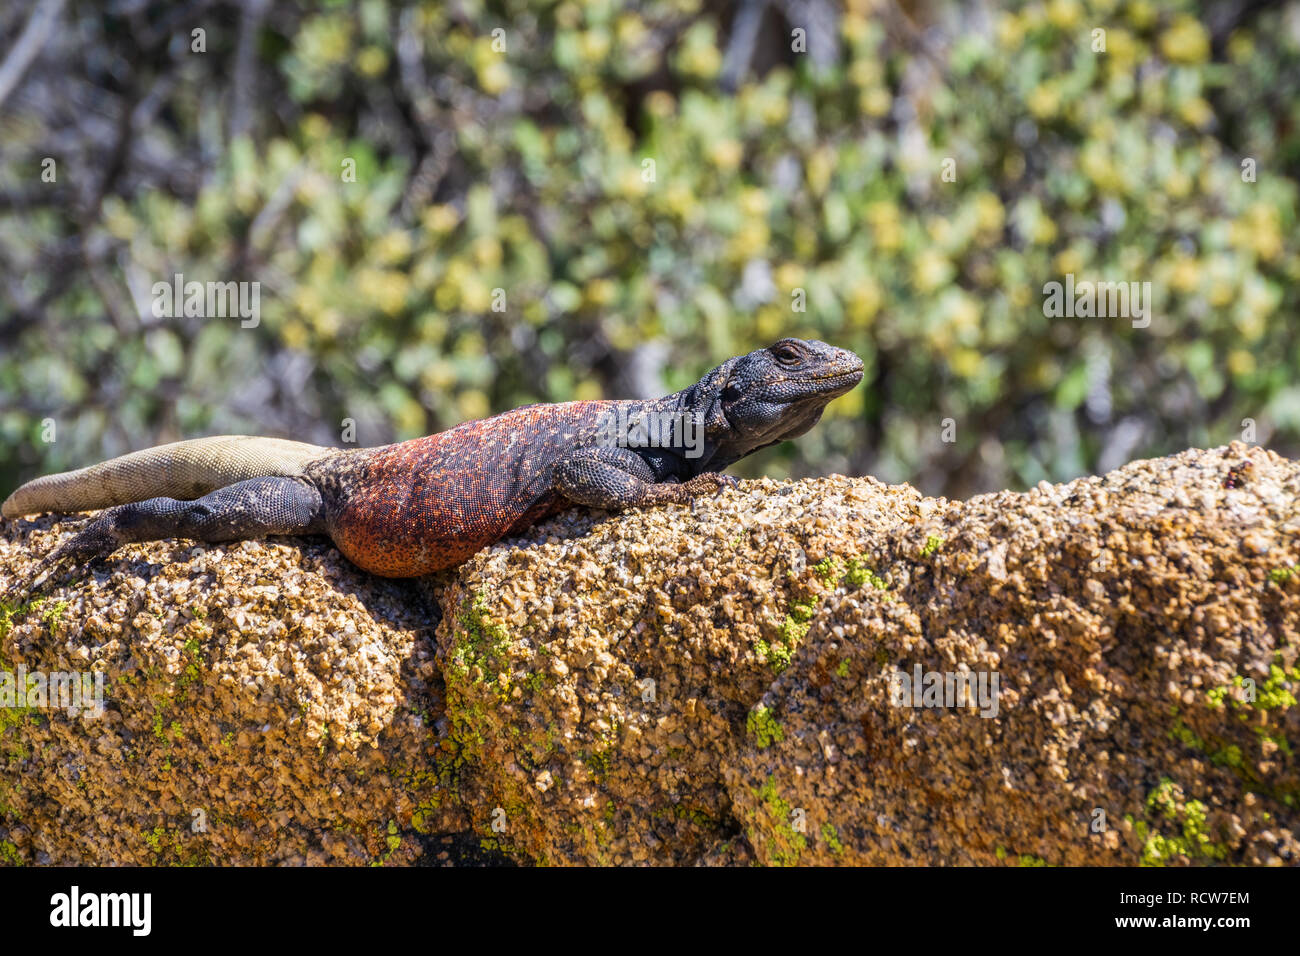 Common Chuckwalla (Sauromalus ater) adult male lounging on a rock, Joshua Tree National Park, California Stock Photo